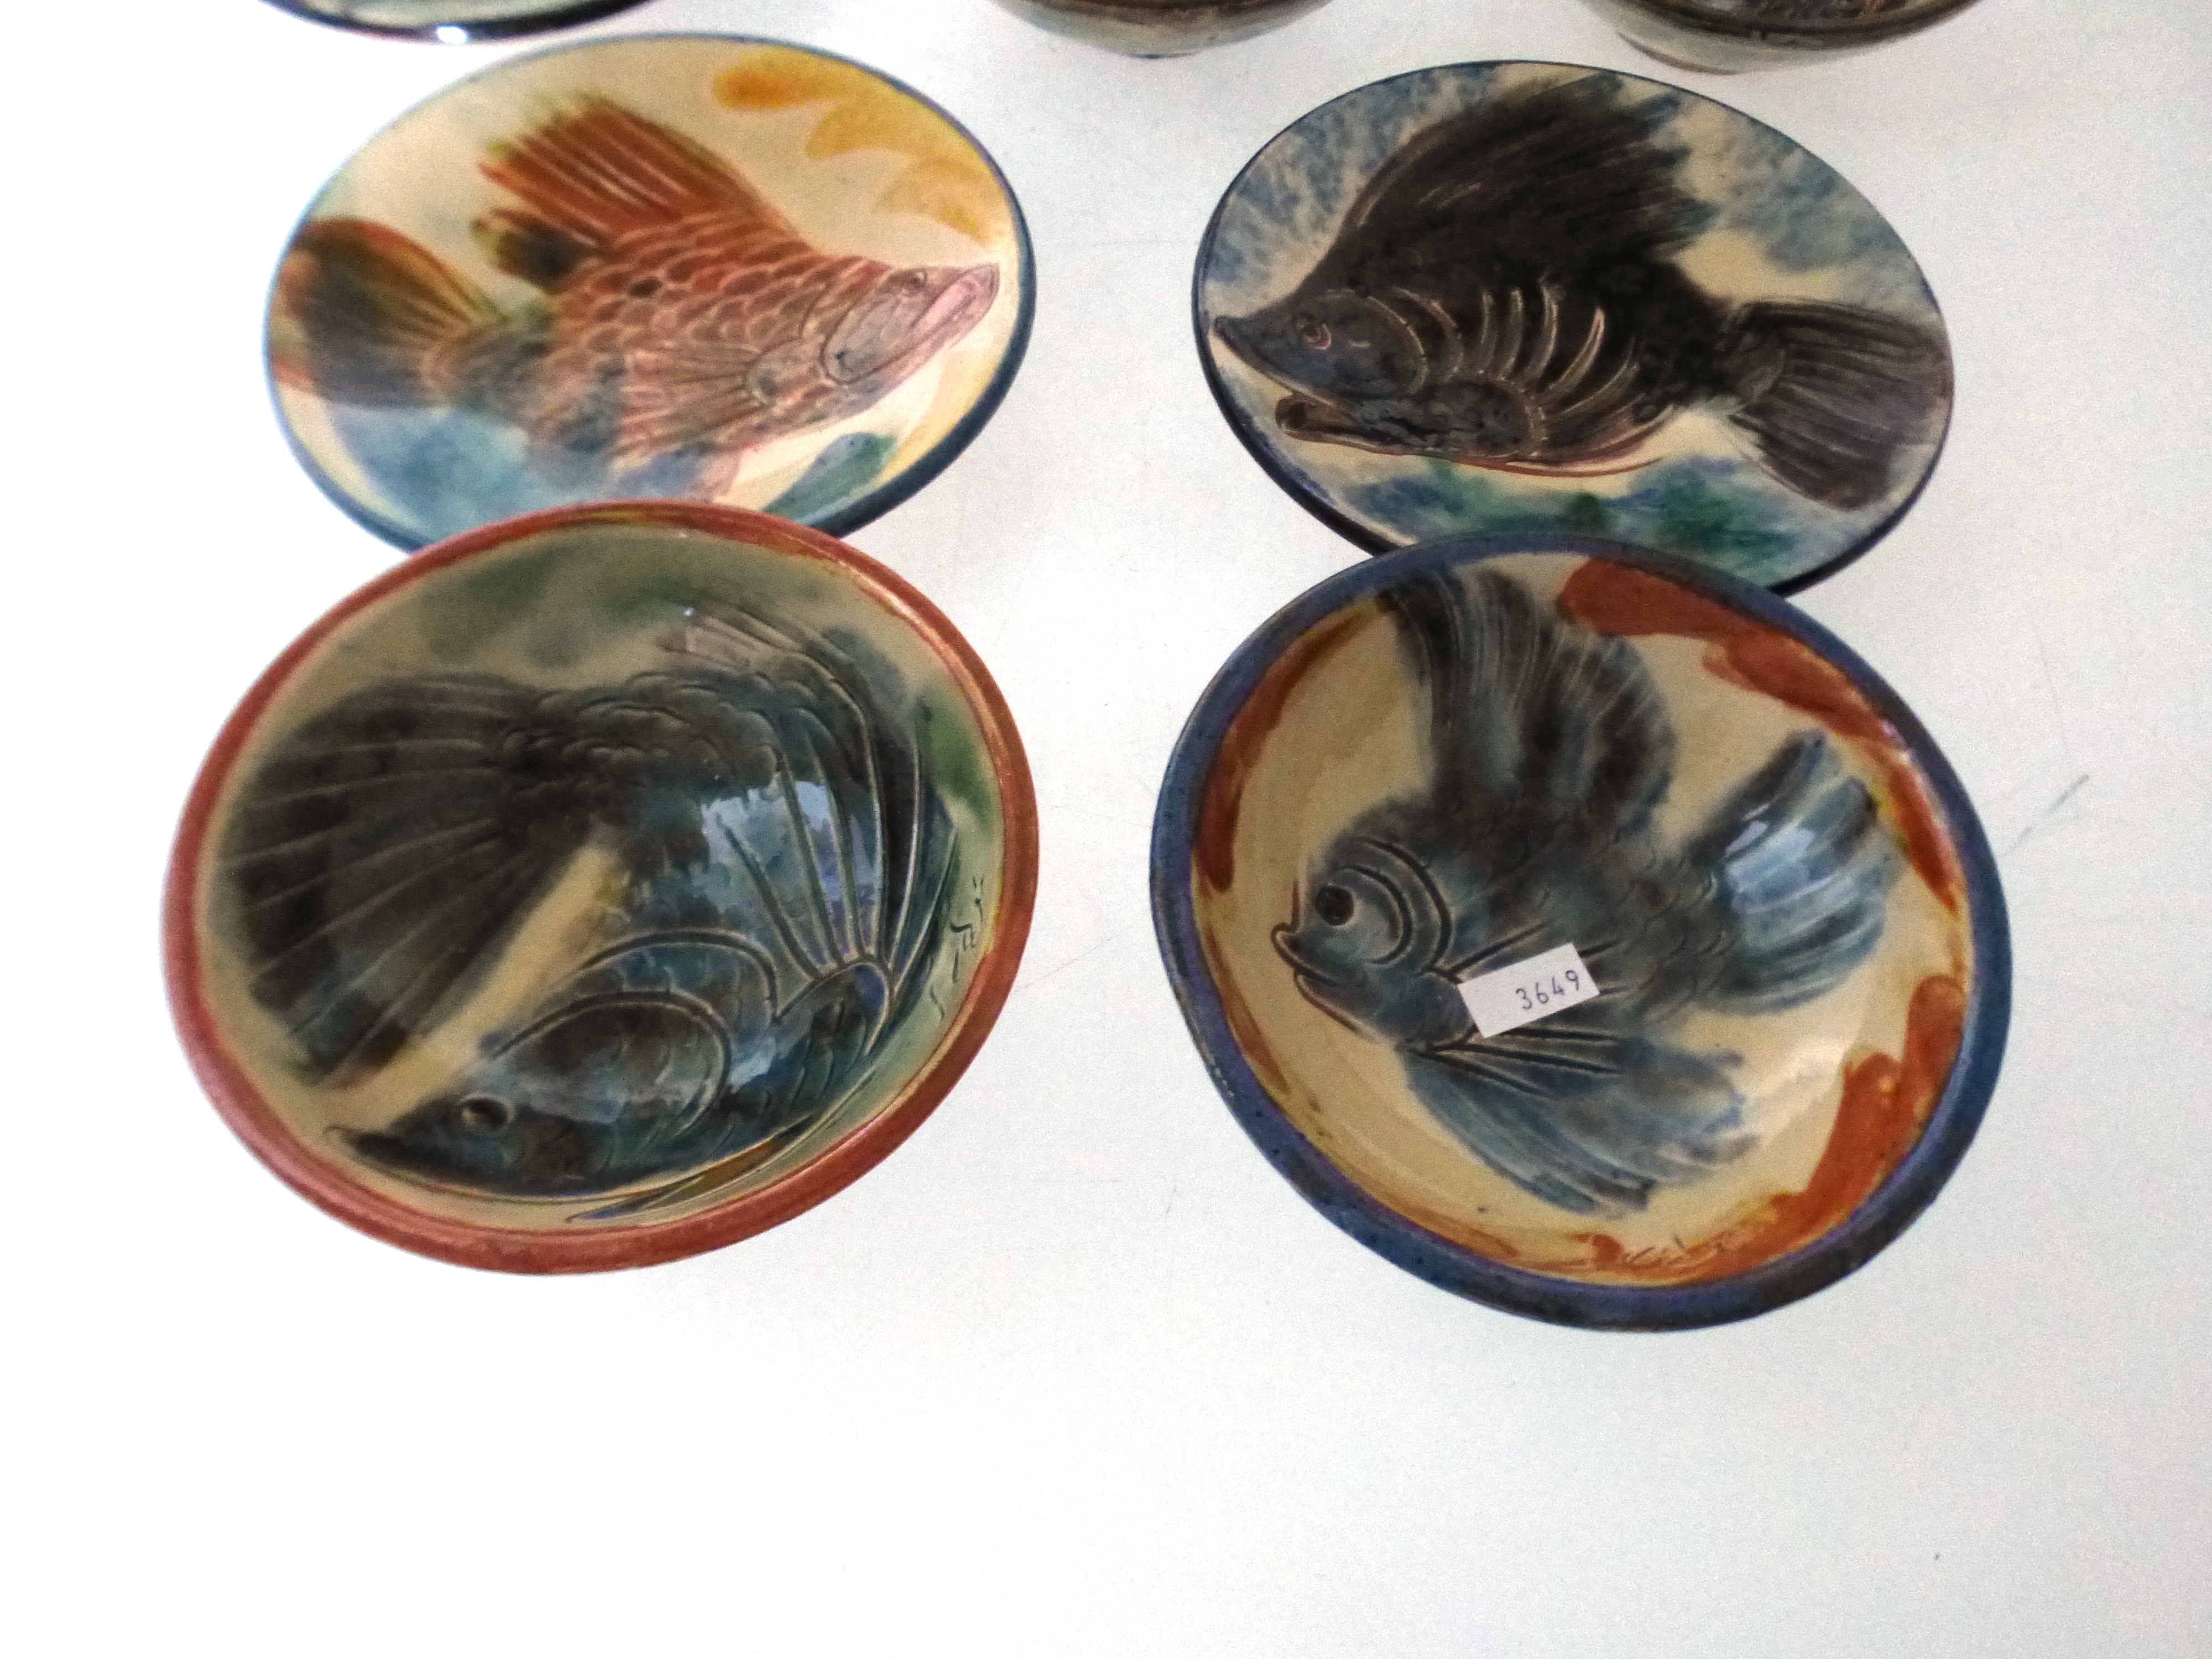 4 SIGNED ART POTTERY FISH DISHES (D: 6") AND 3 SIGNED ART POTTERY FISH PLATES (D:7") - Image 2 of 7